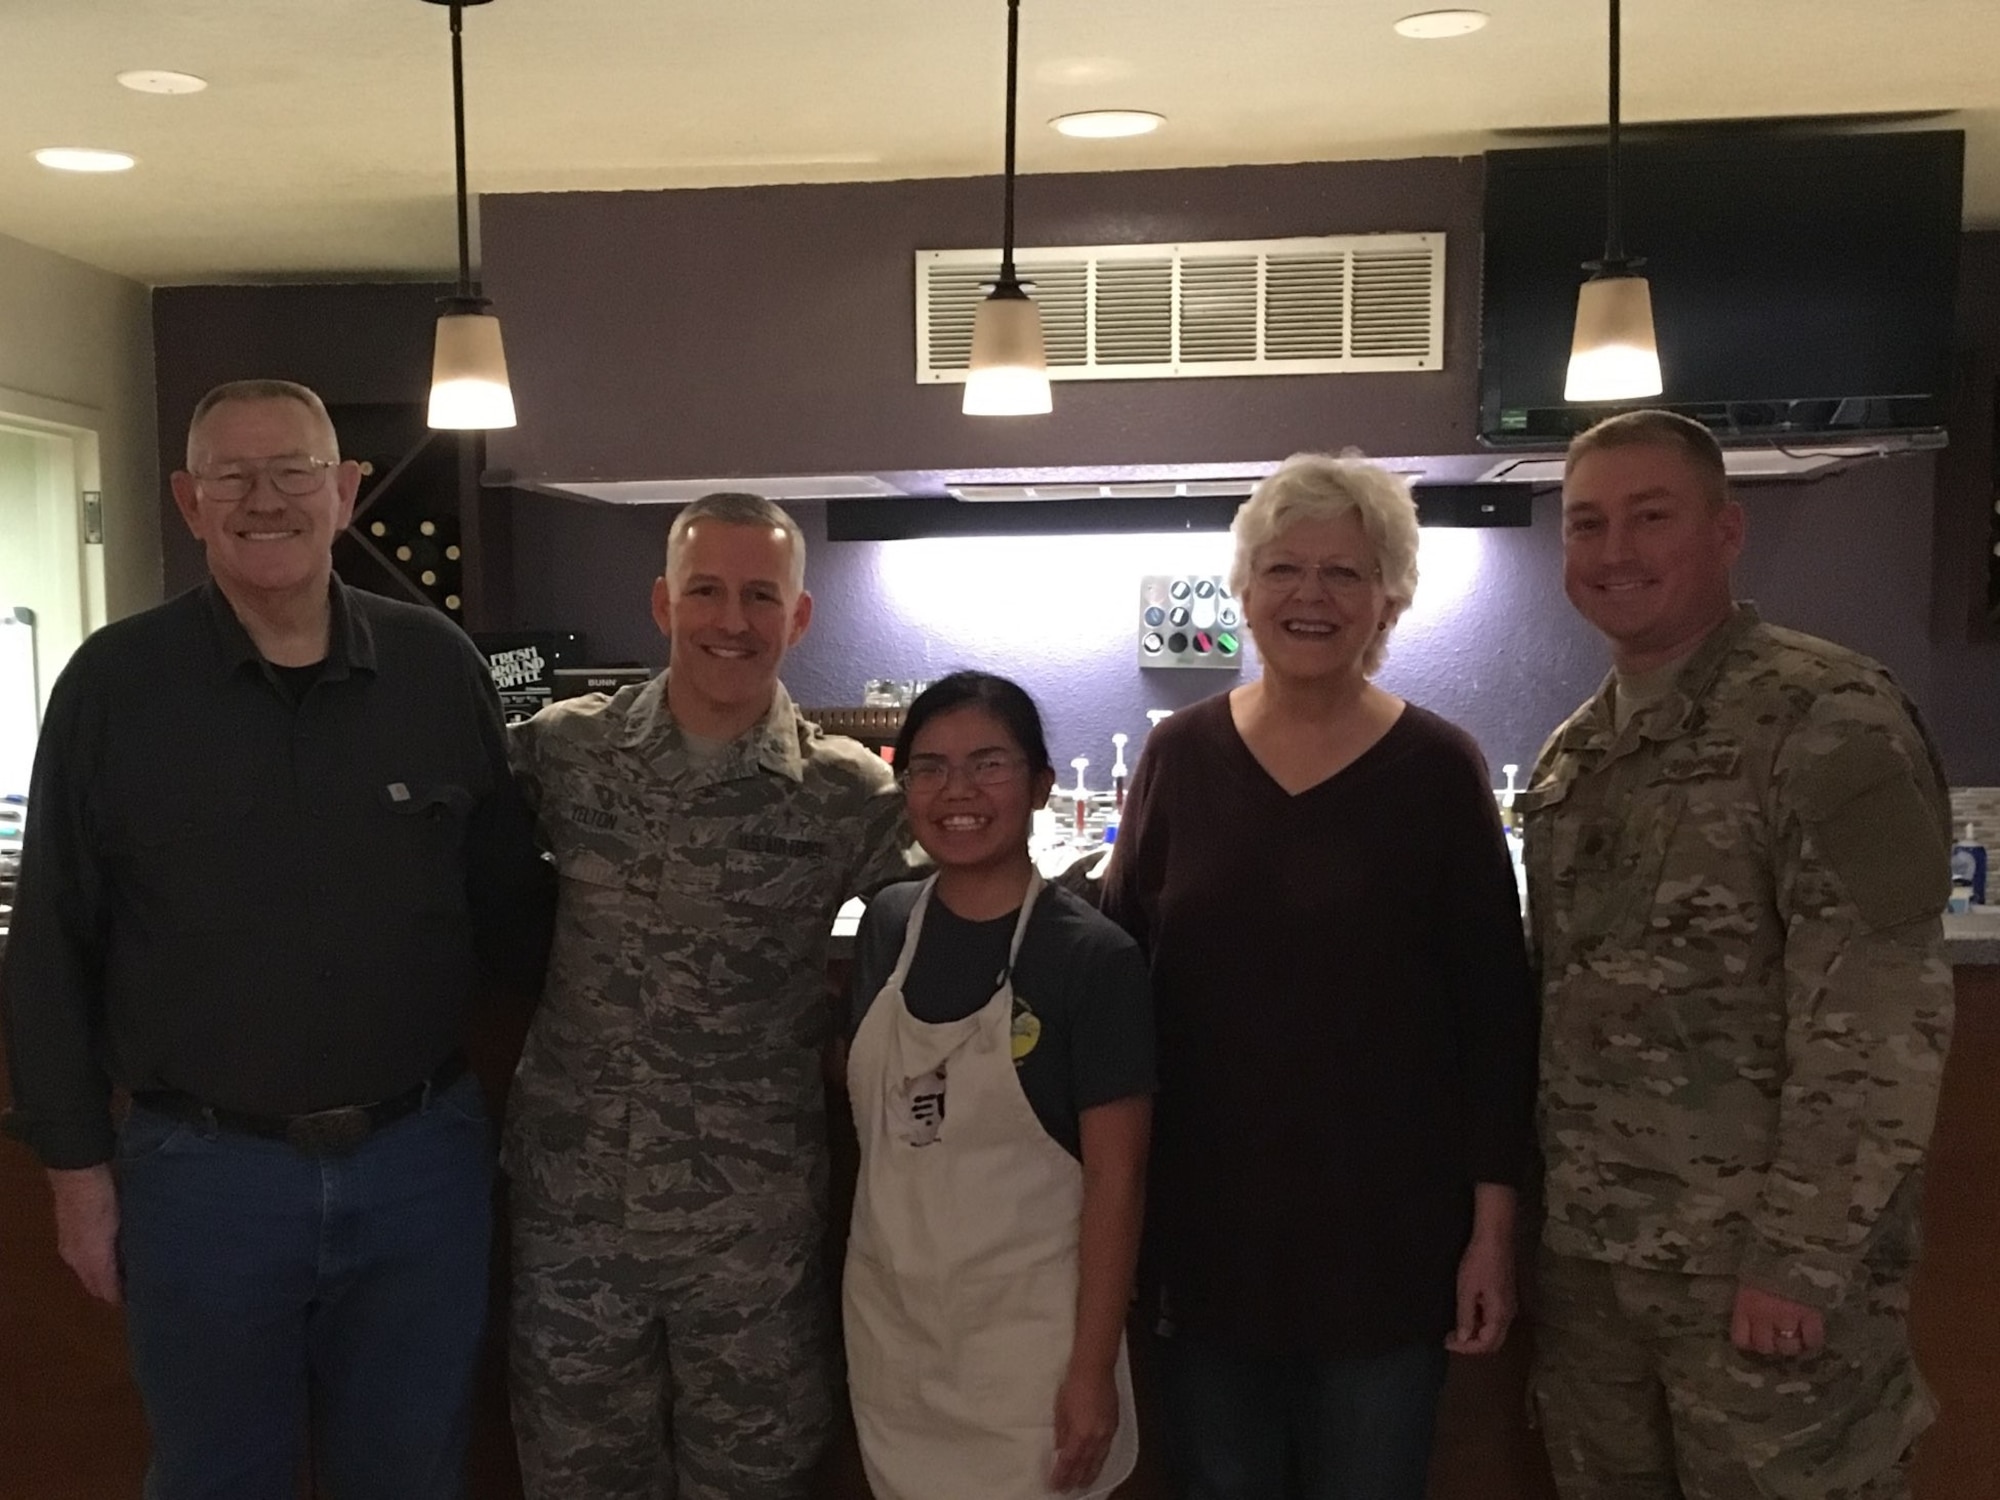 Airman 1st Class Femke Vargas, Refuel Cafe volunteer, was coined for excellent wingmanship, Oct. 5, 2018, at the Refuel Cafe on Holloman Air Force Base, N.M. Through making handcrafted beverages at her new home away from home, Vargas found her stride, improving the morale of other Airmen and developing leadership skills. (Courtesy photo by Staff Sgt. BreeAnn Sachs)